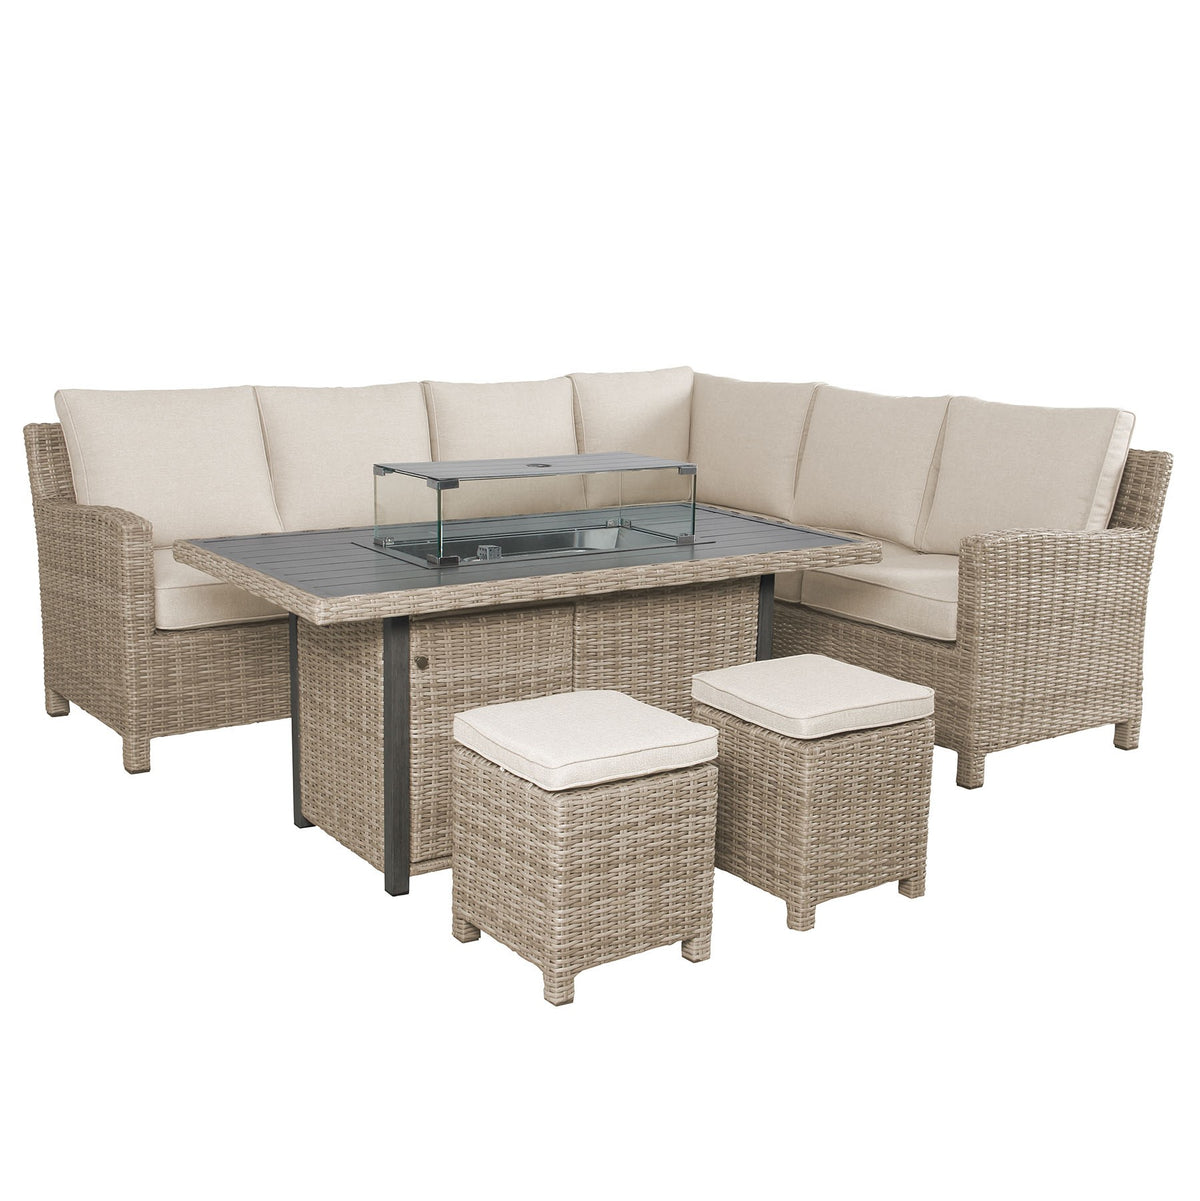 Kettler Palma Corner Left Hand Oyster Wicker Outdoor Sofa Set with Fire Pit Table